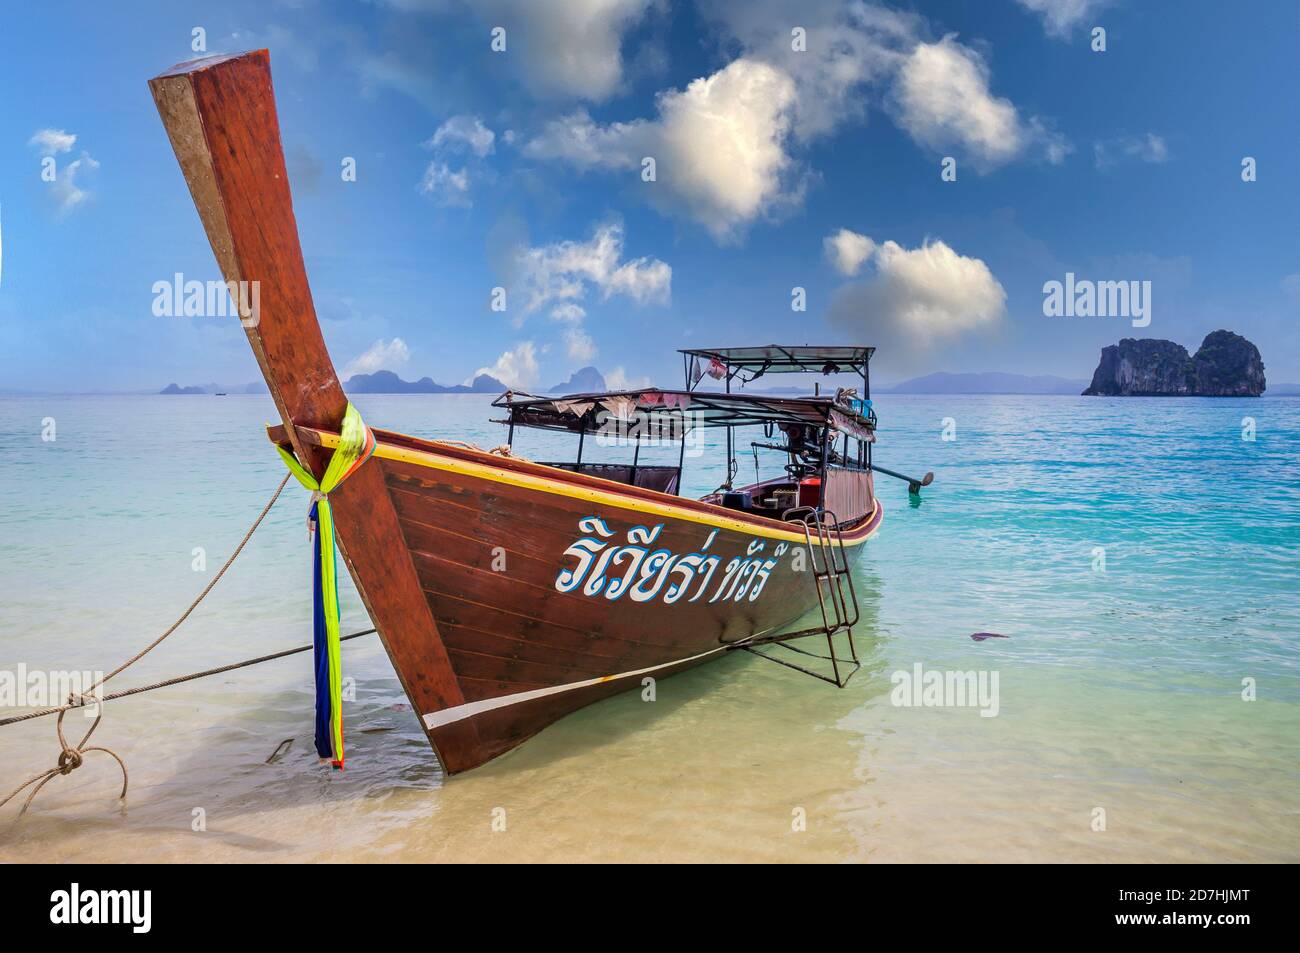 Longtail boat on beach in Thailand with blue sky Stock Photo